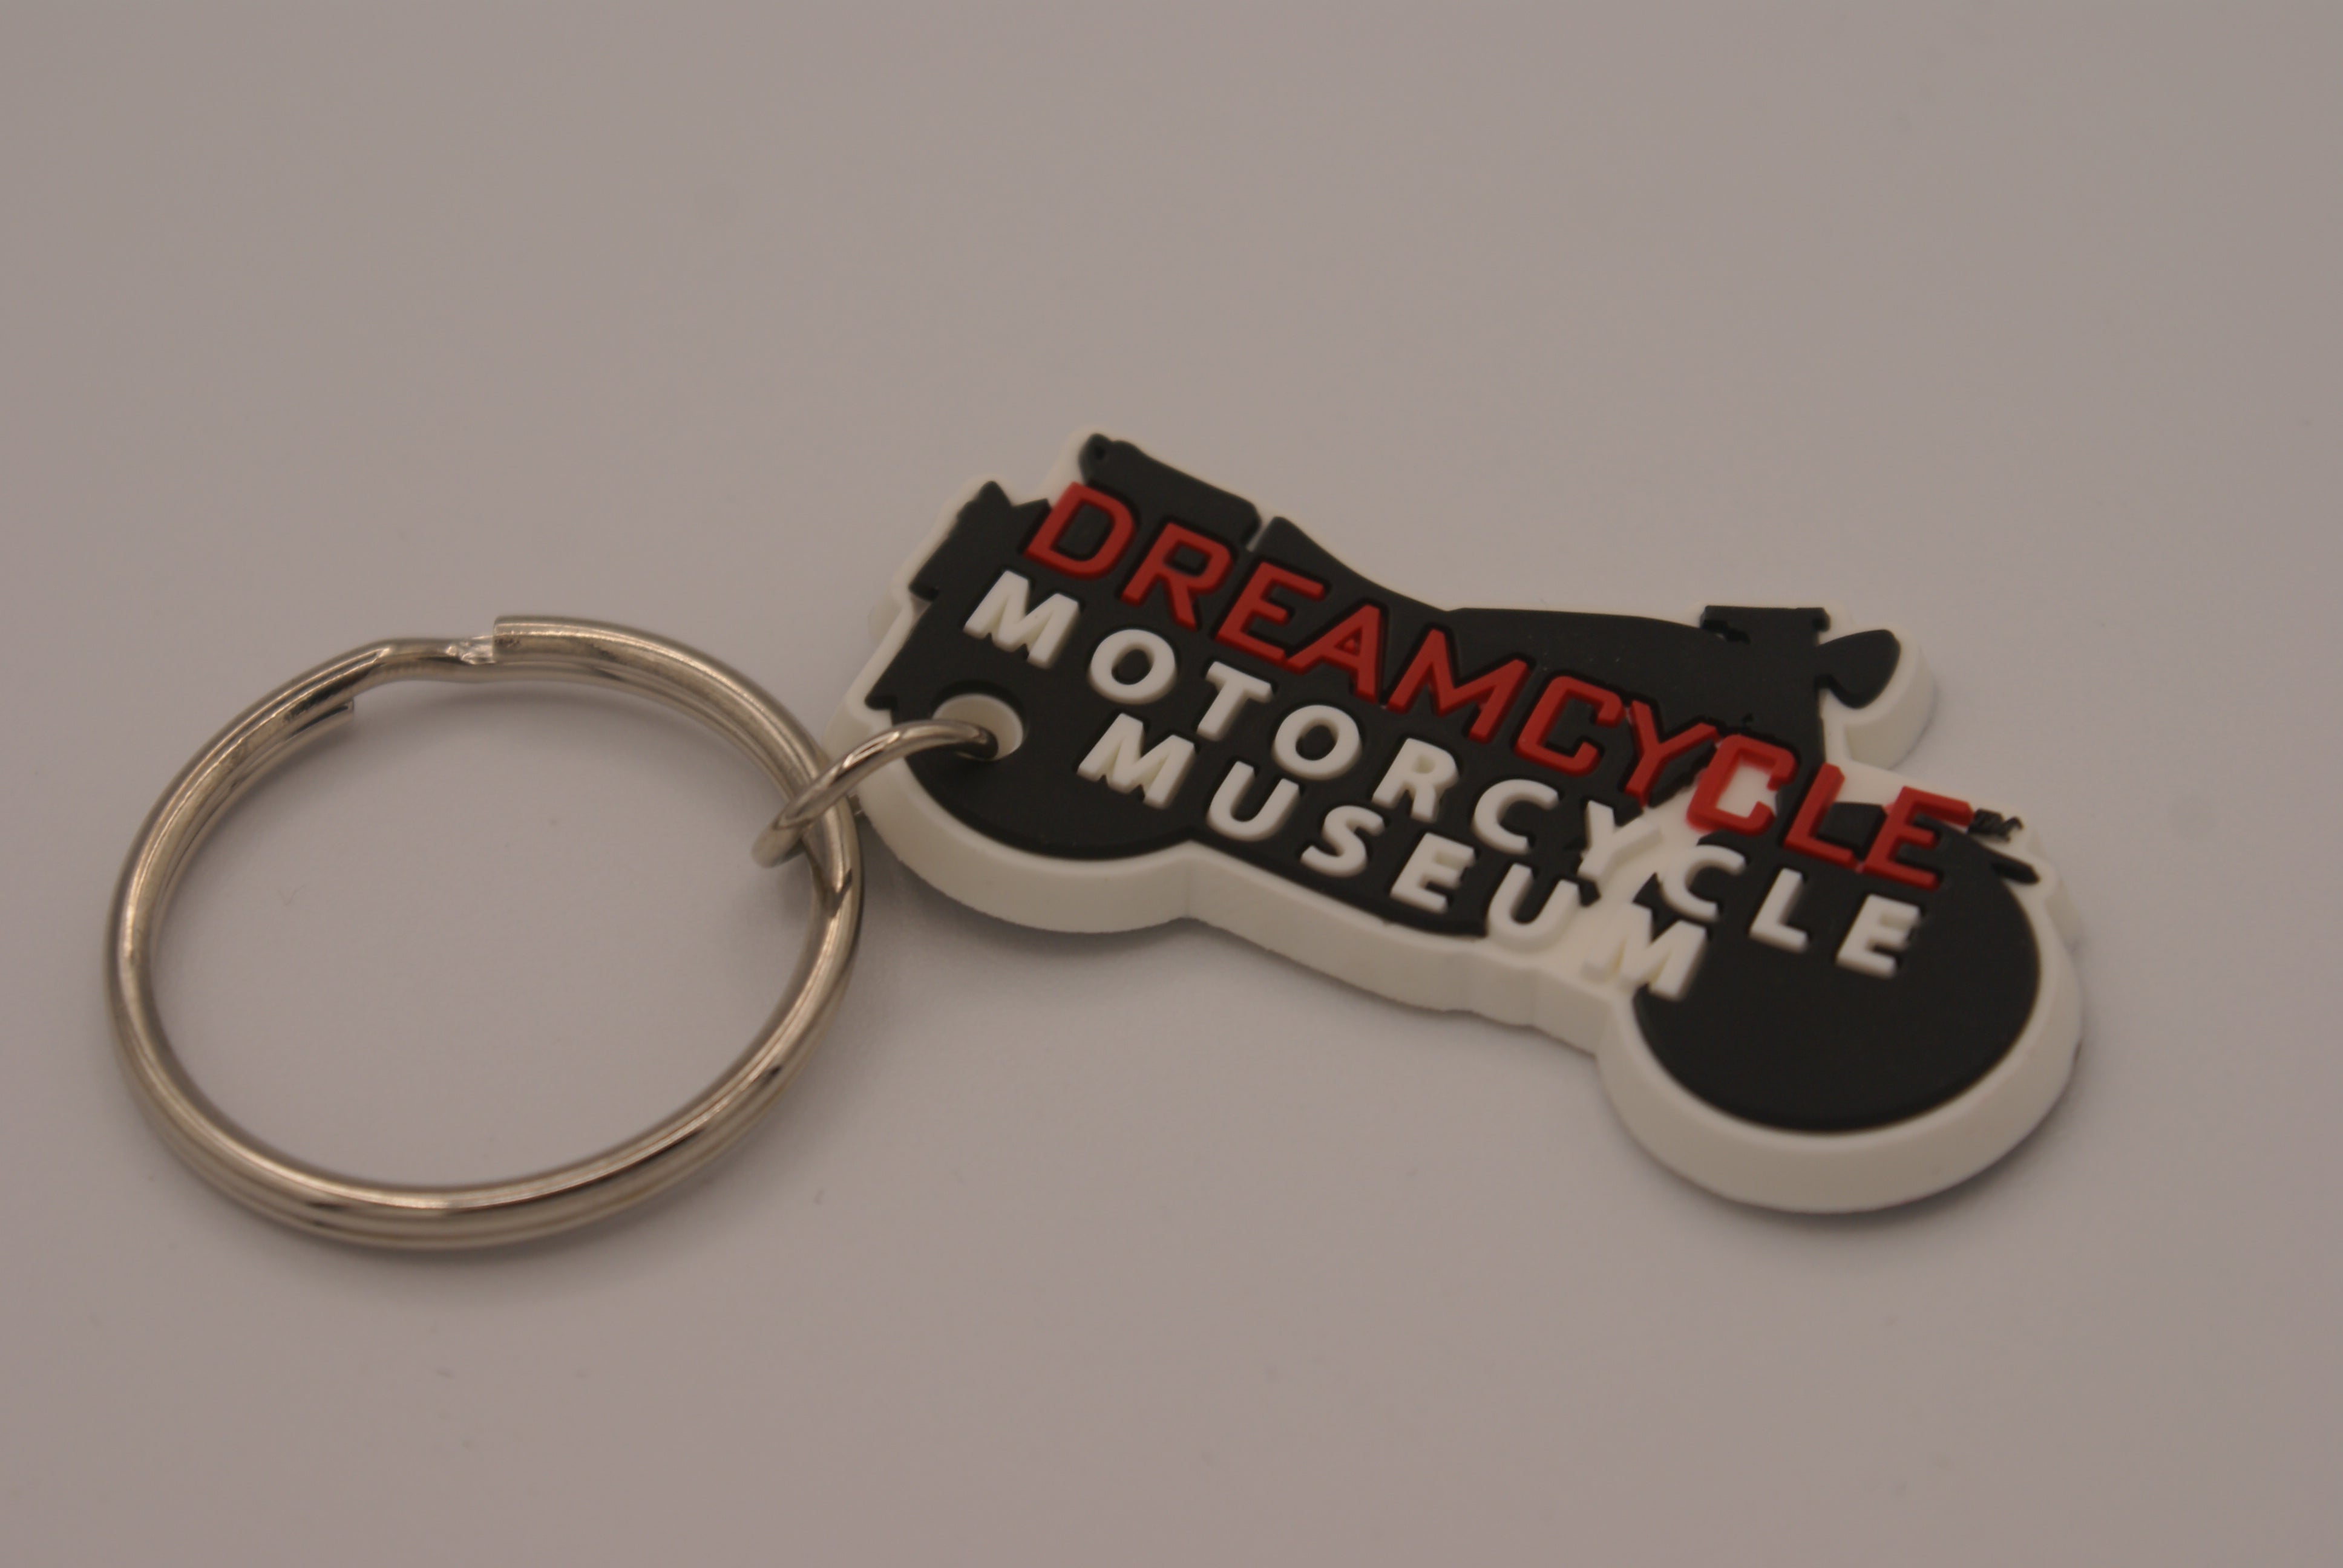 Dreamcycle Key Chain